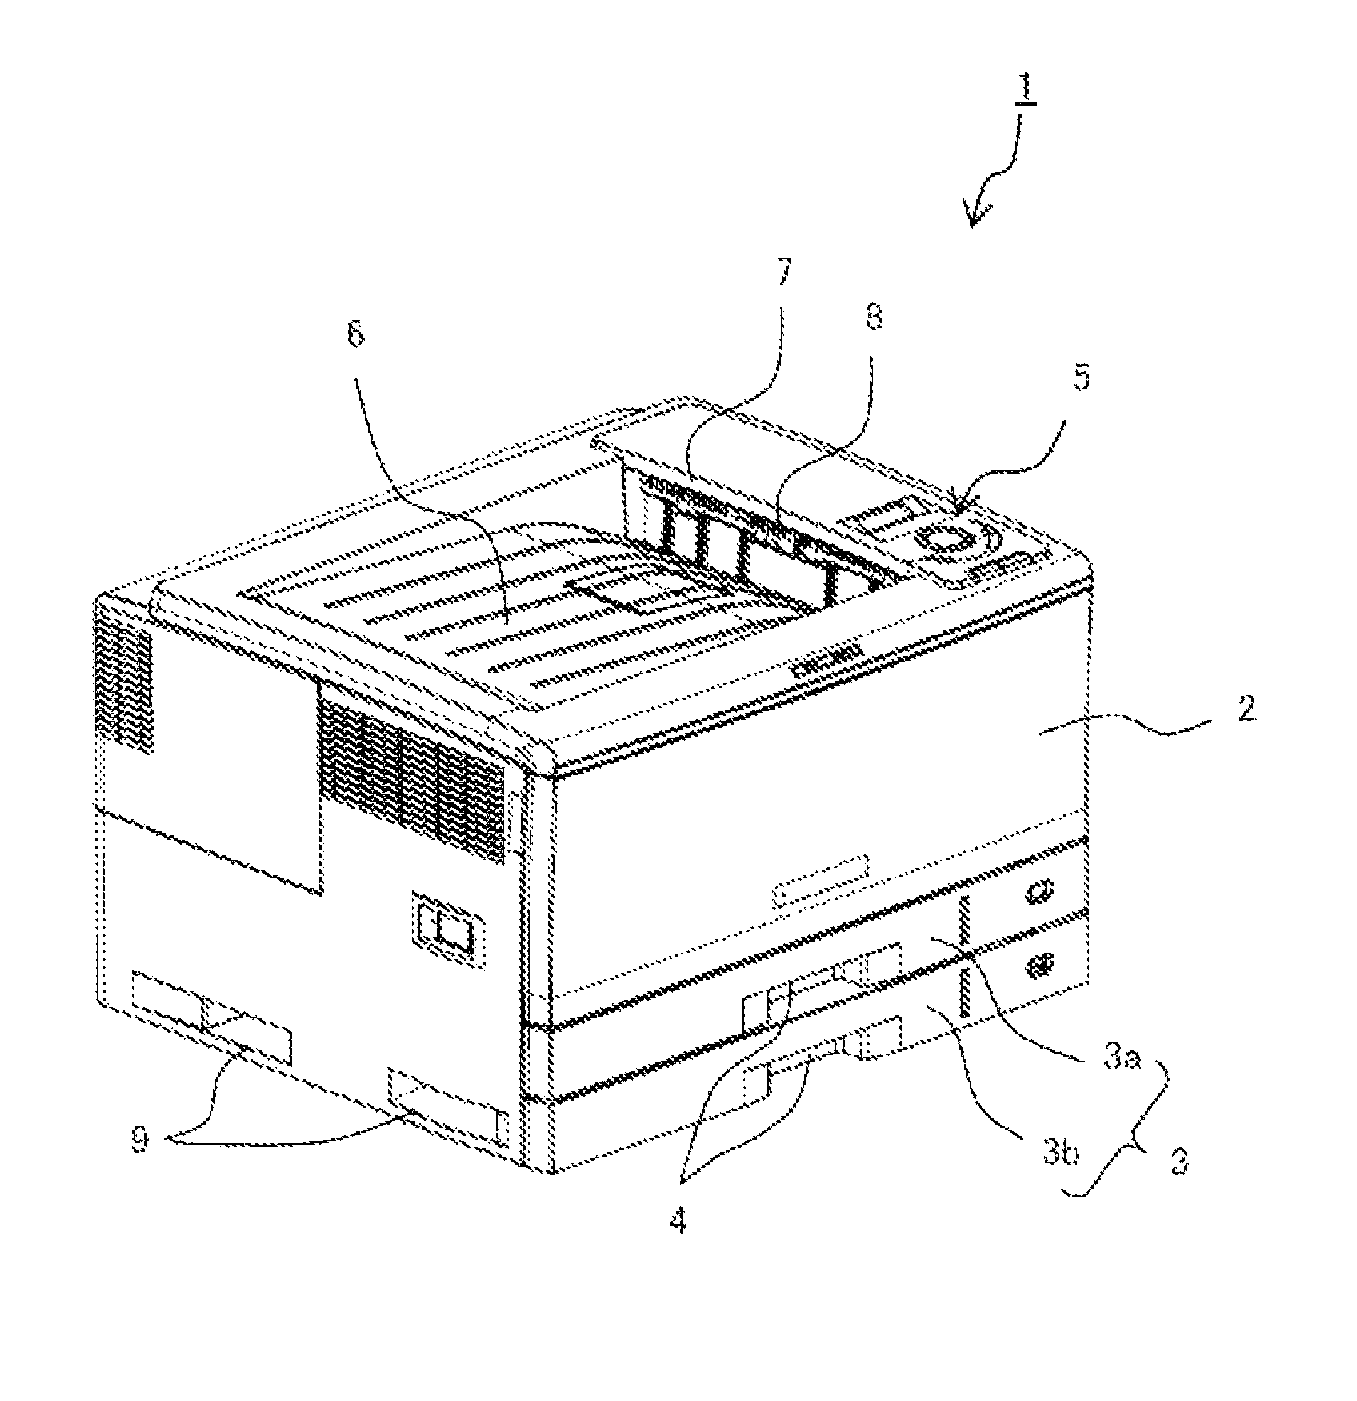 Image-forming apparatus and paper cassette used therein